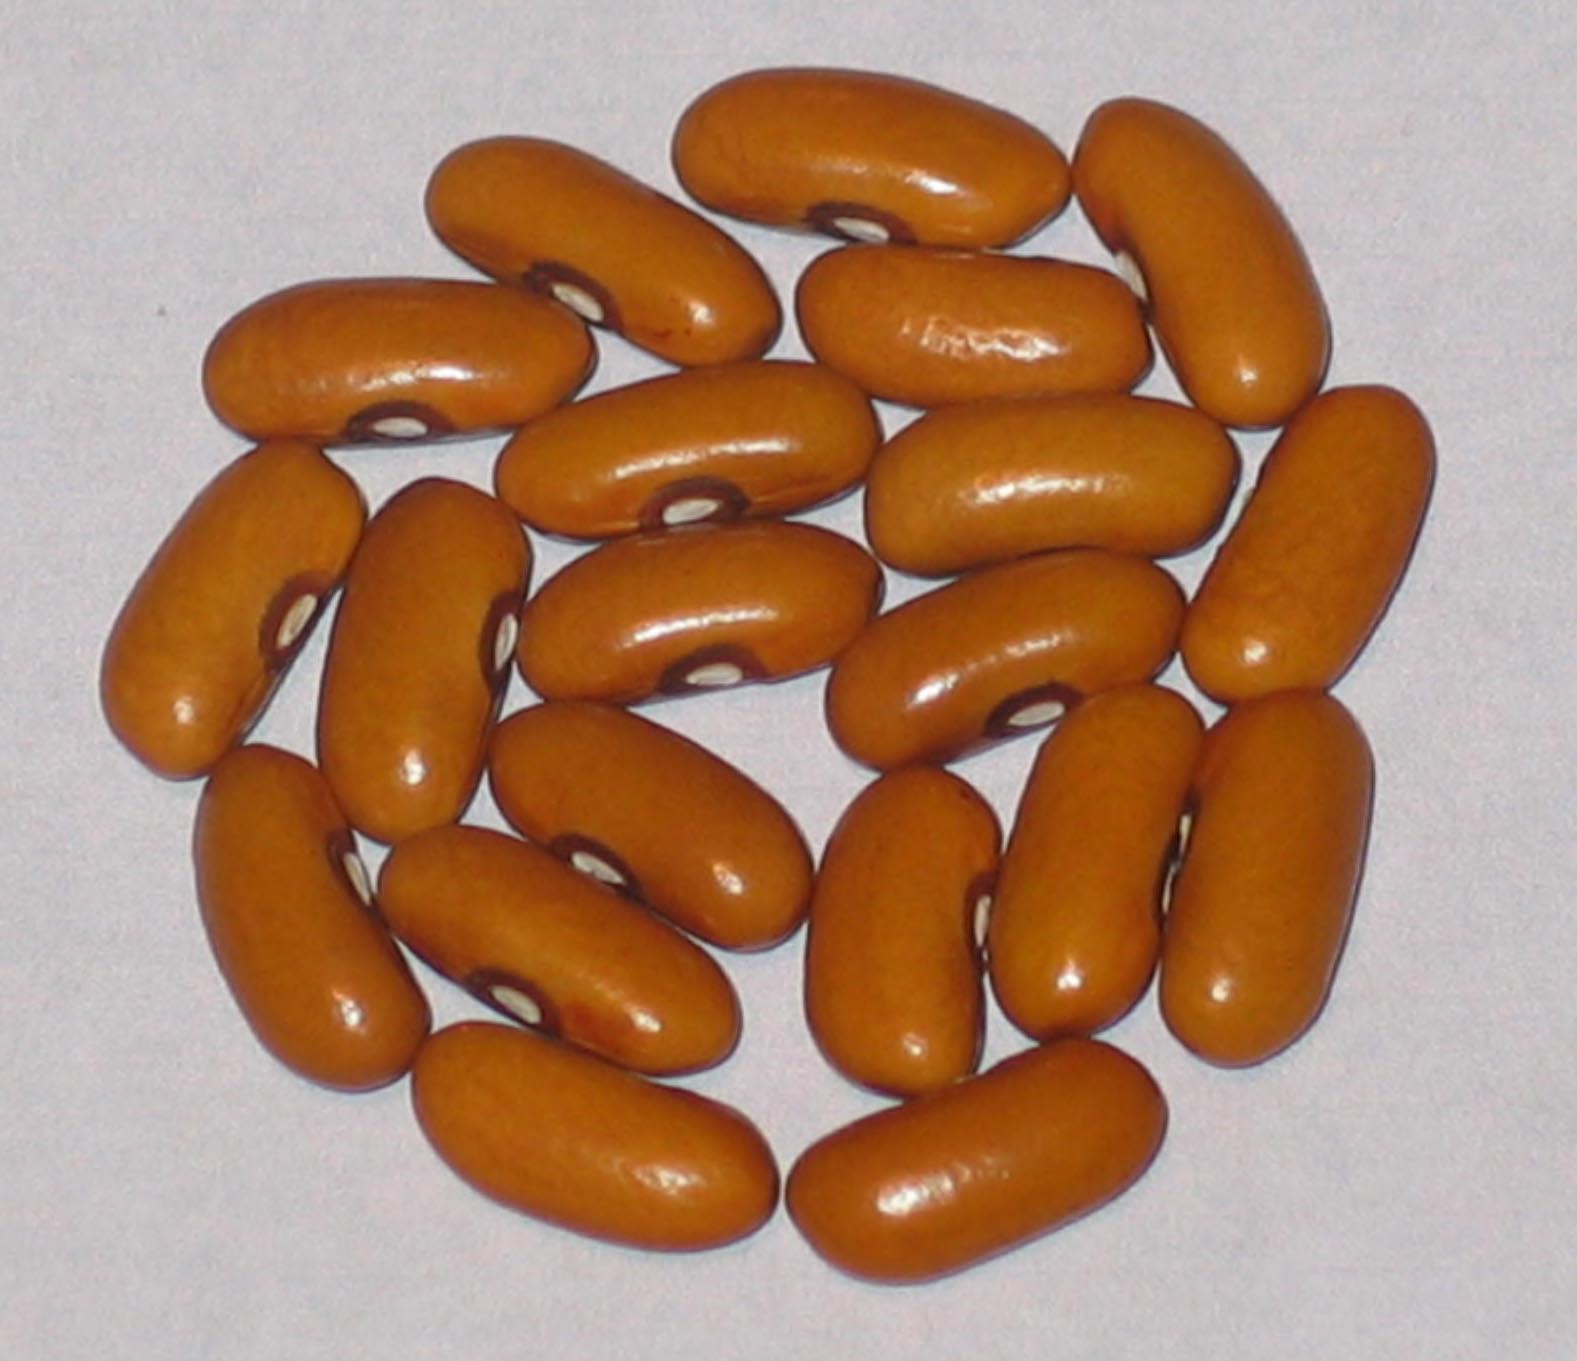 image of Gaucho beans